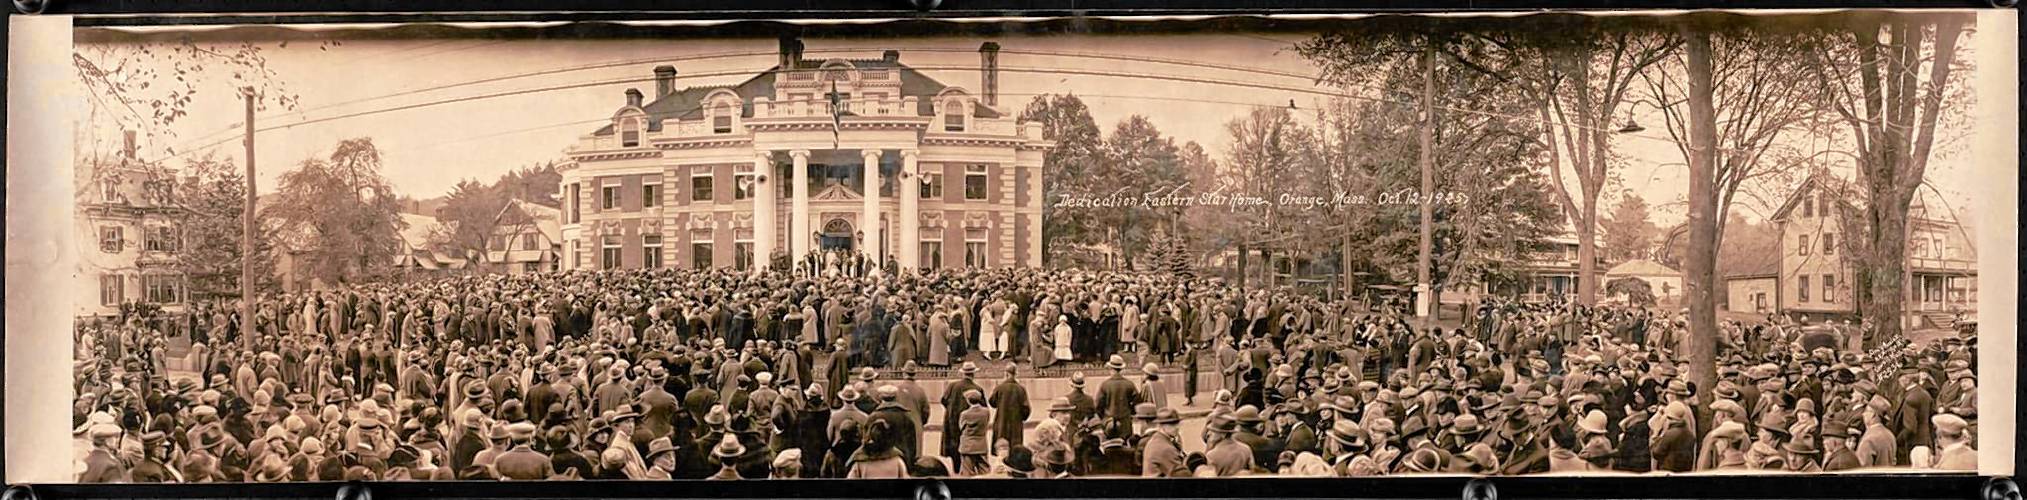 This photo was taken in October 1925 at the opening of the Eastern Star Rest Home, formerly the Wheeler Mansion. The event attracted more than 1,000 people. Cynthia Butler, current owner of the mansion, is hoping to recreate the 1925 photo.